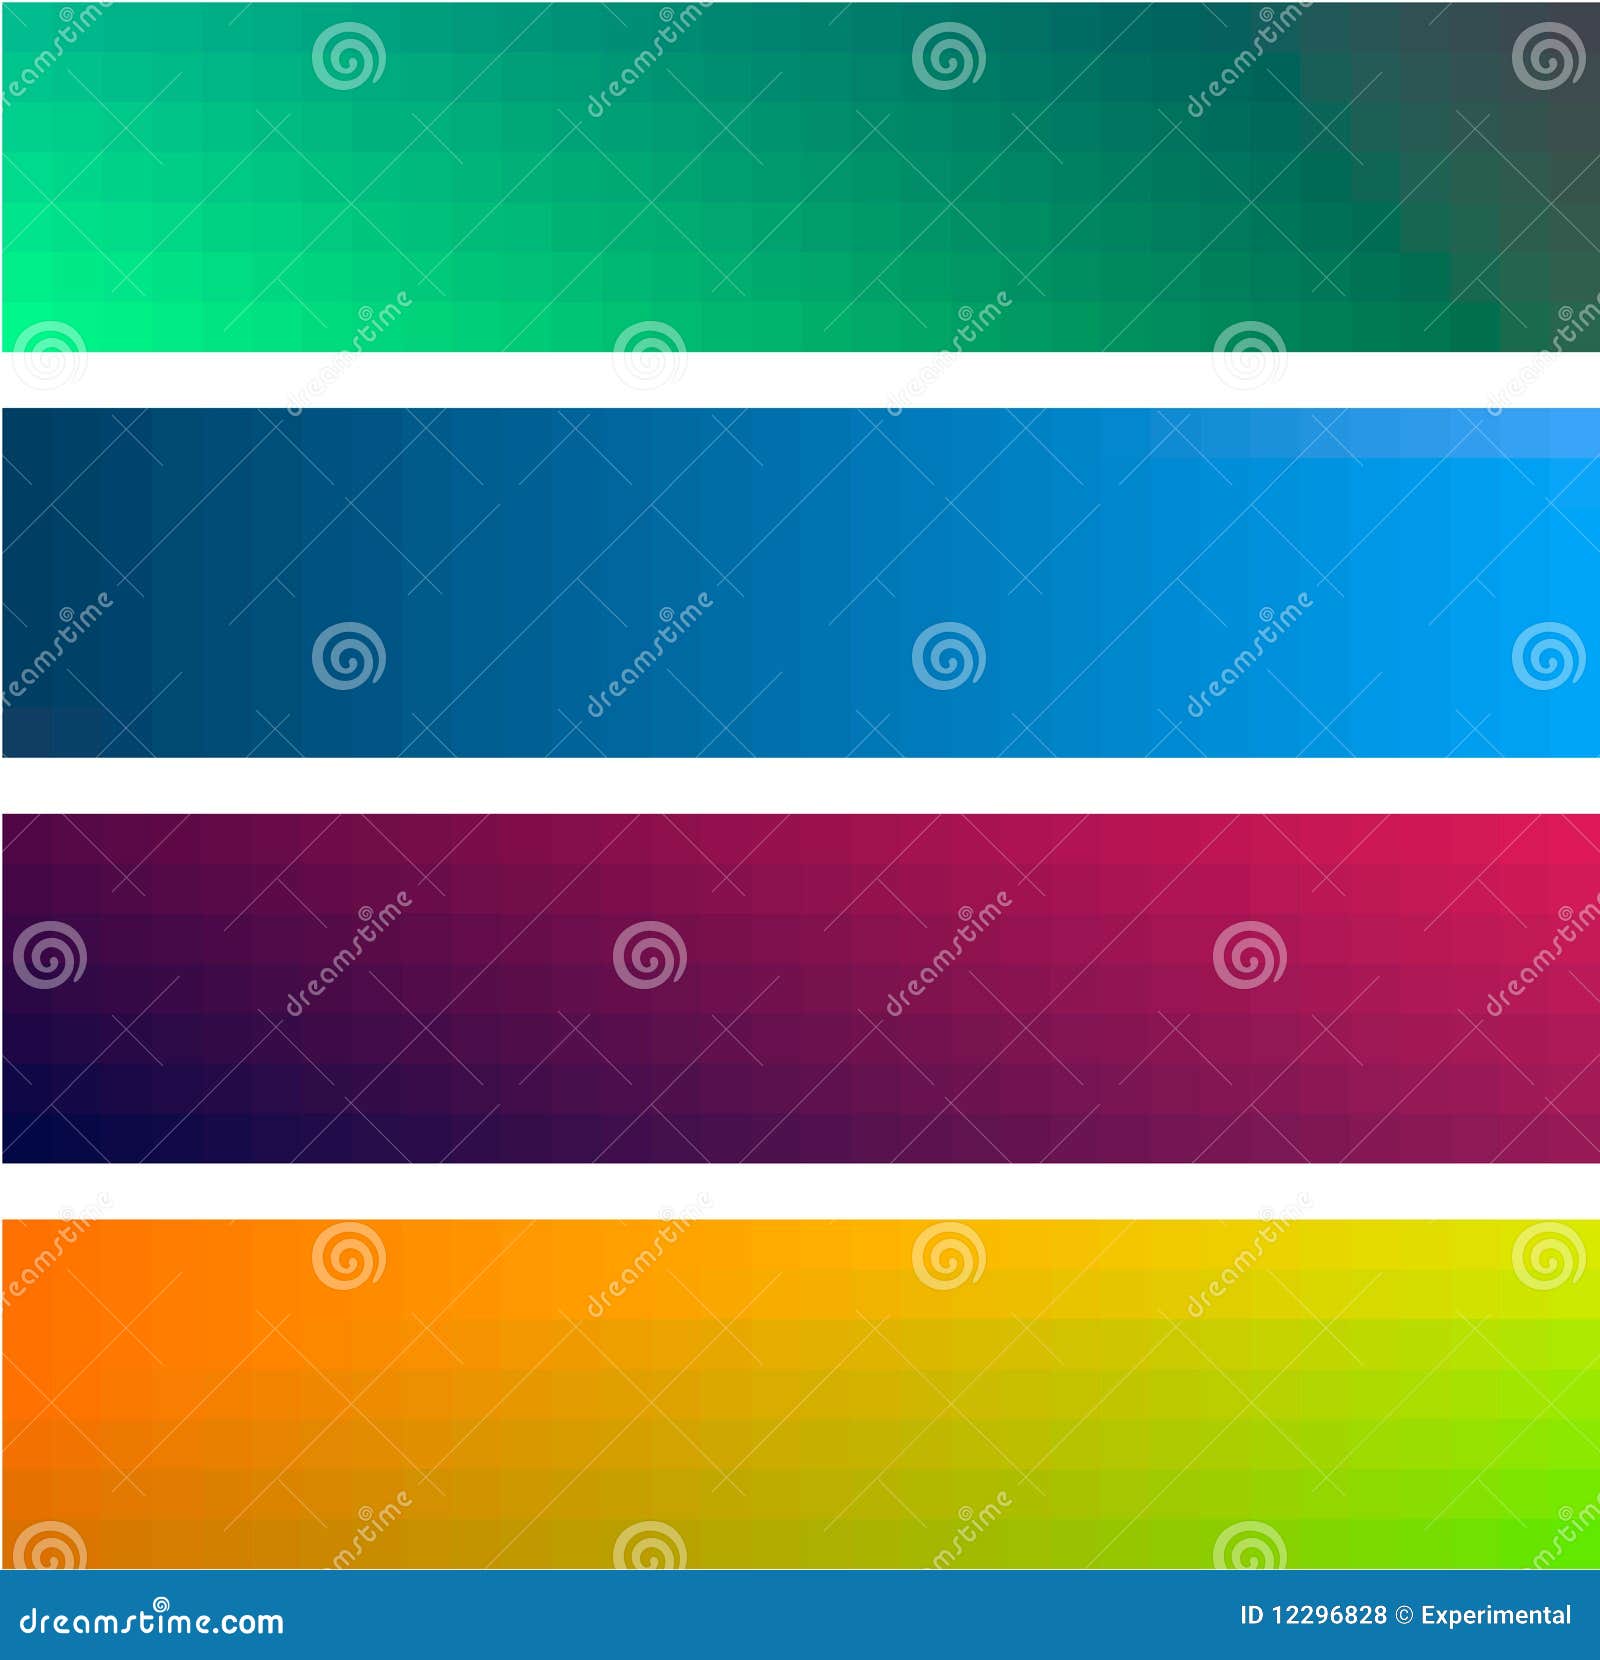 Gradient Color Banners Backgrounds Stock Vector - Illustration of ...